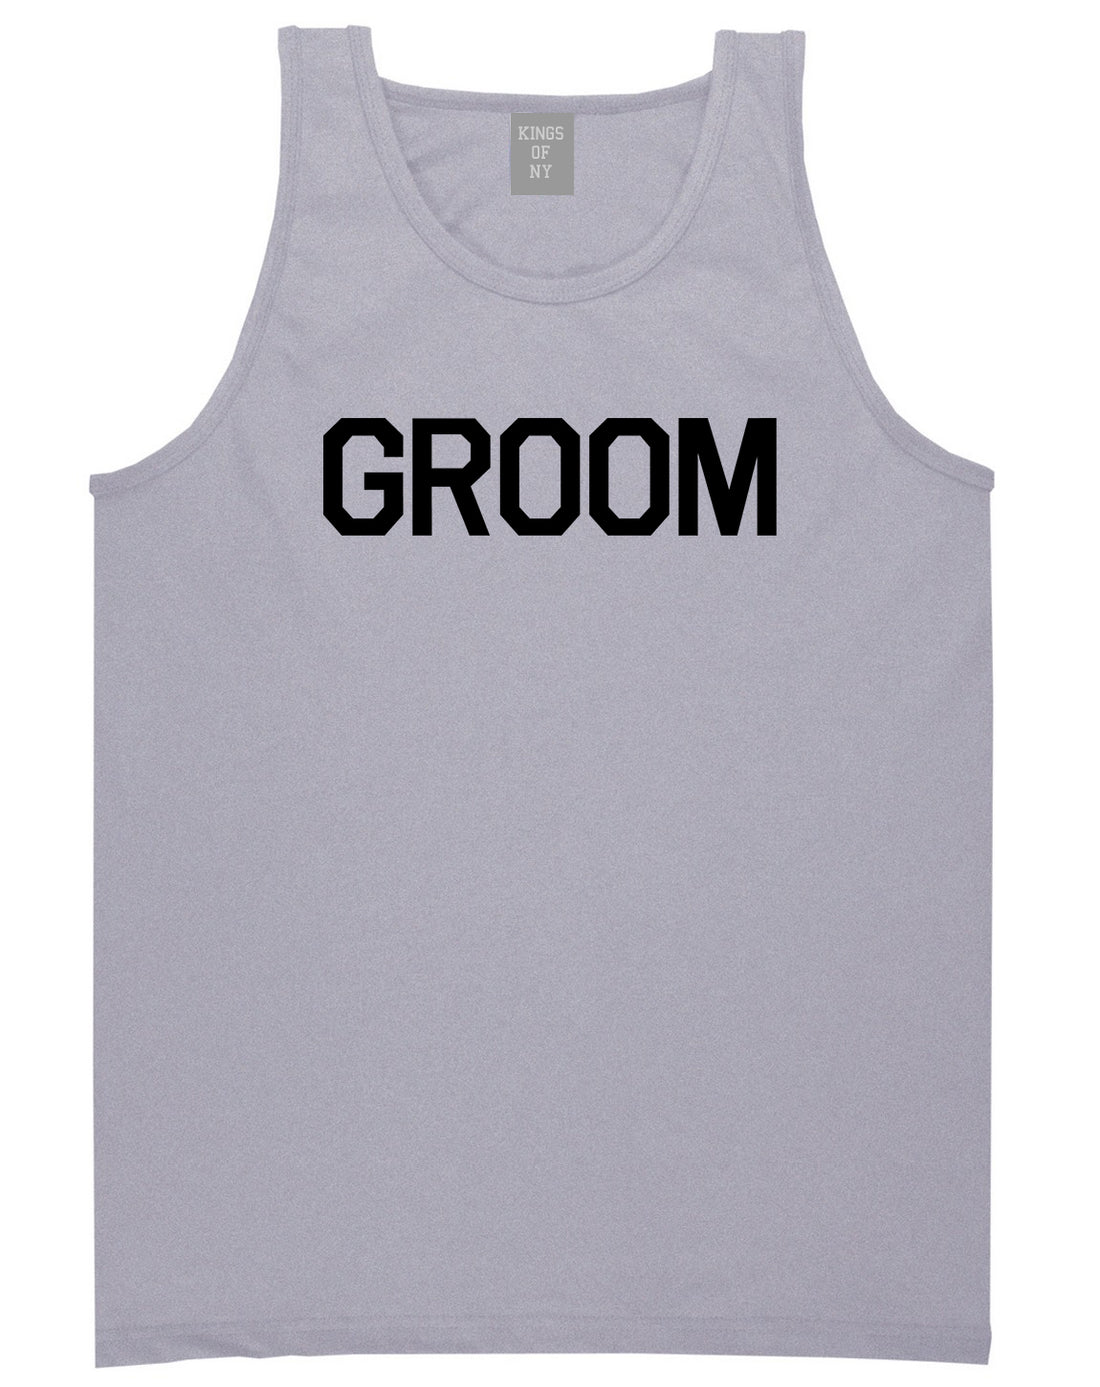 The Groom Bachelor Party Grey Tank Top Shirt by Kings Of NY